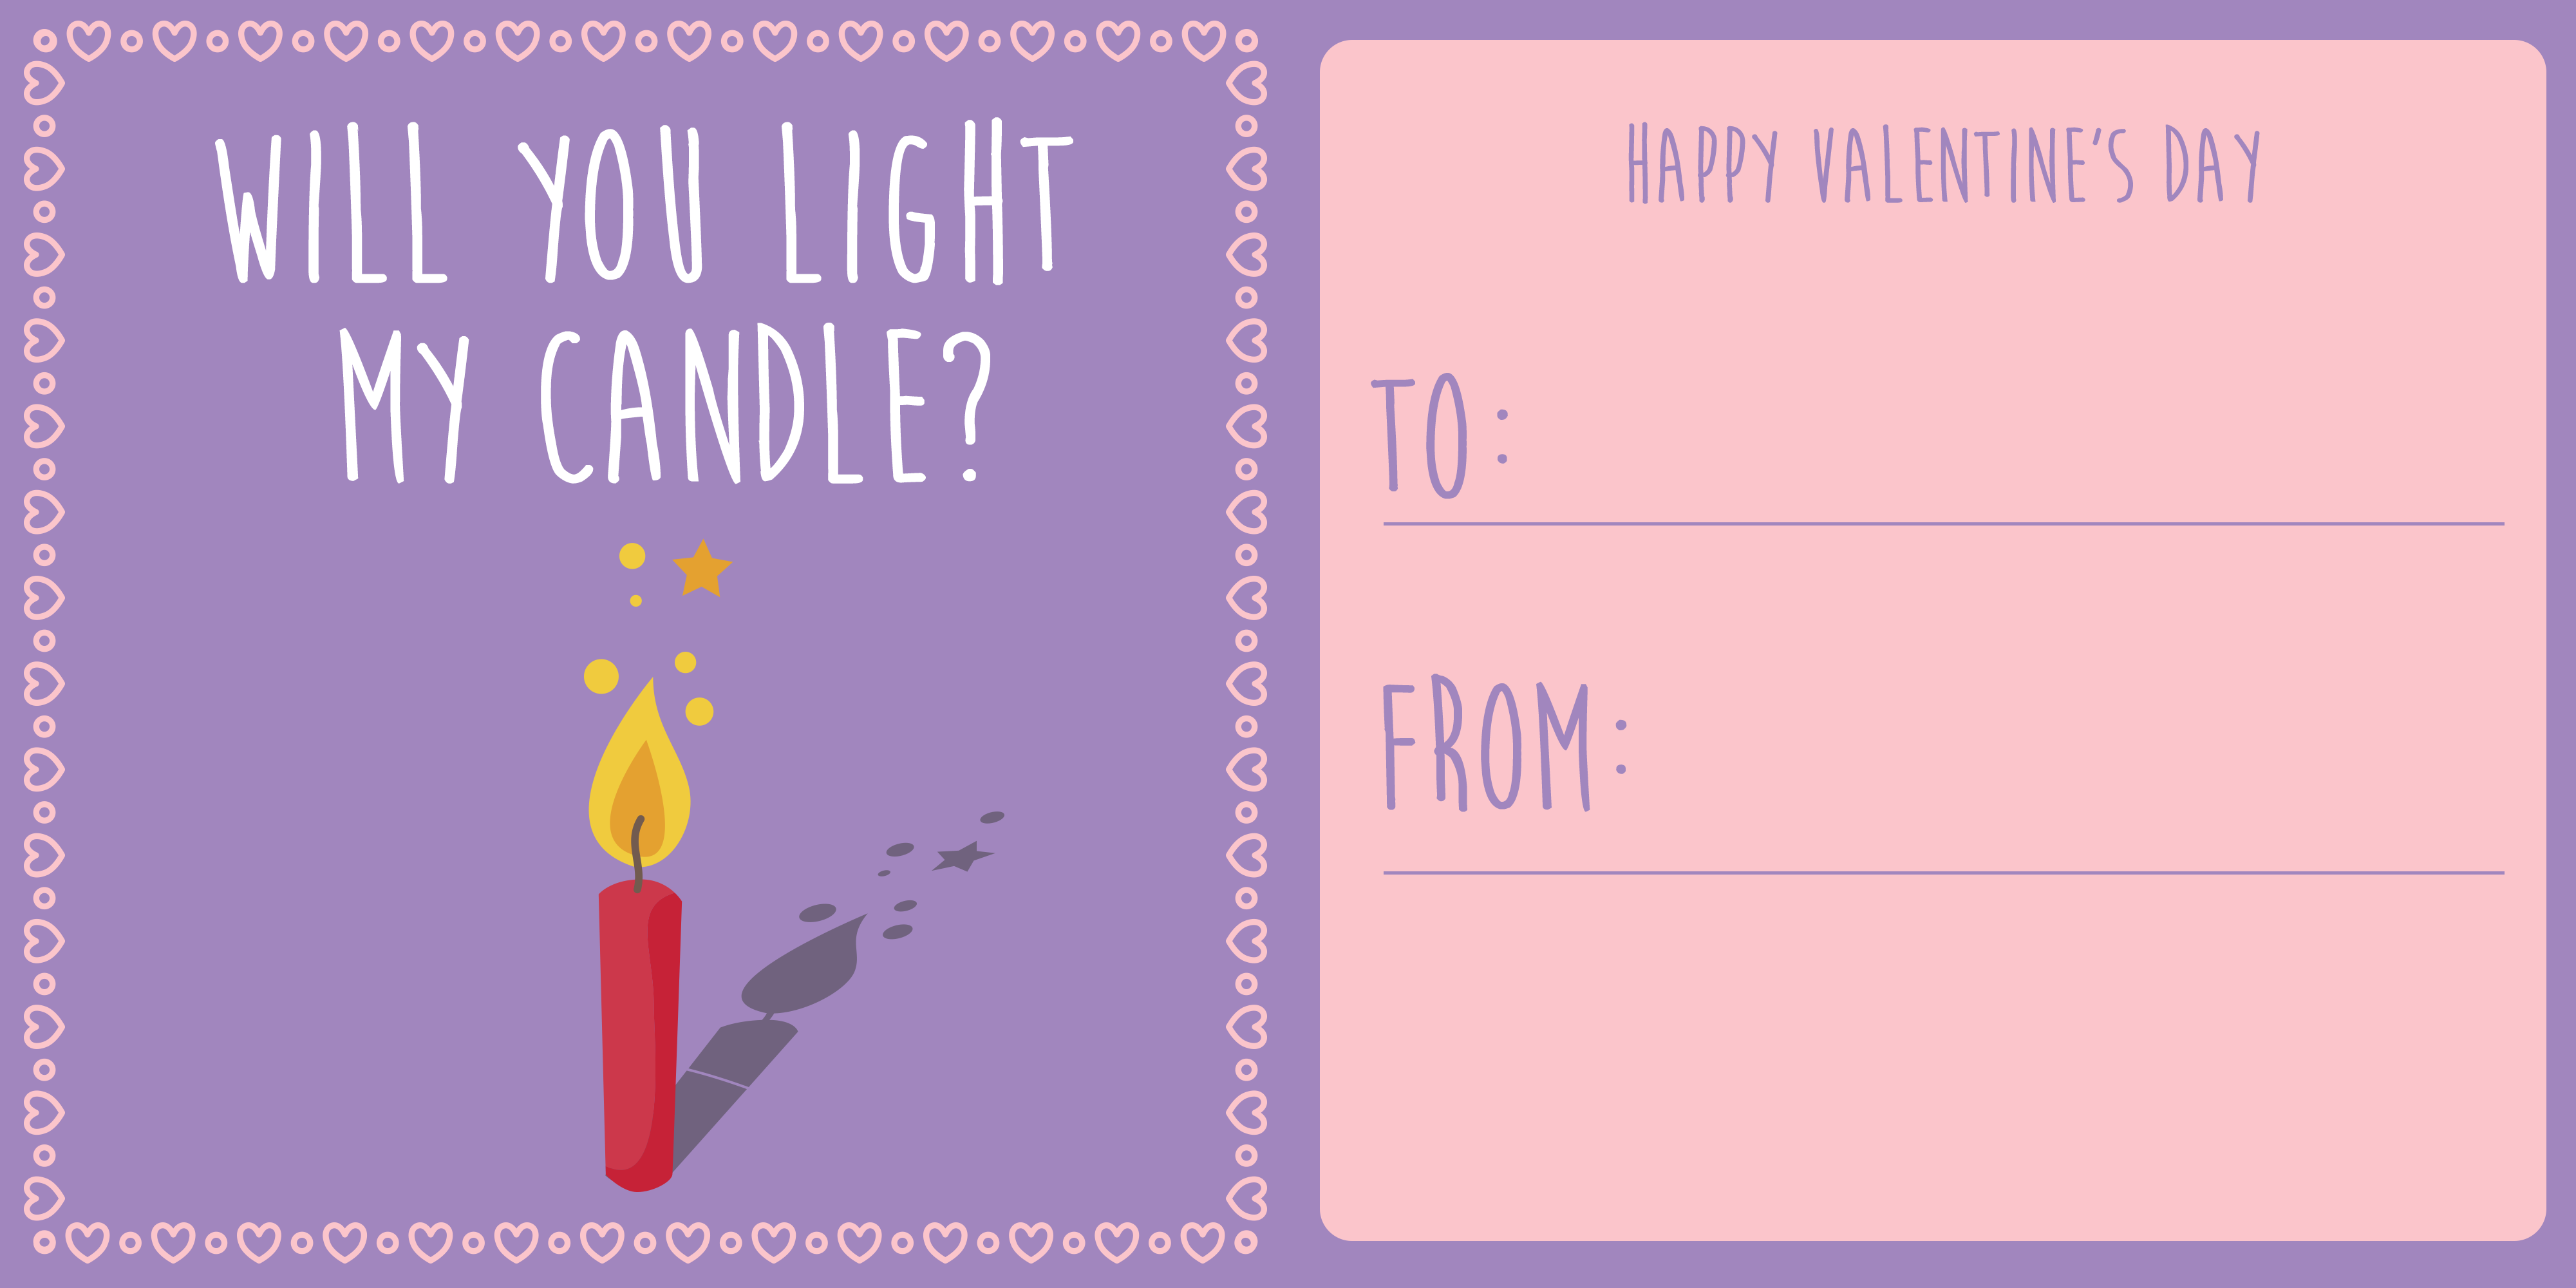 Light my candle - Card